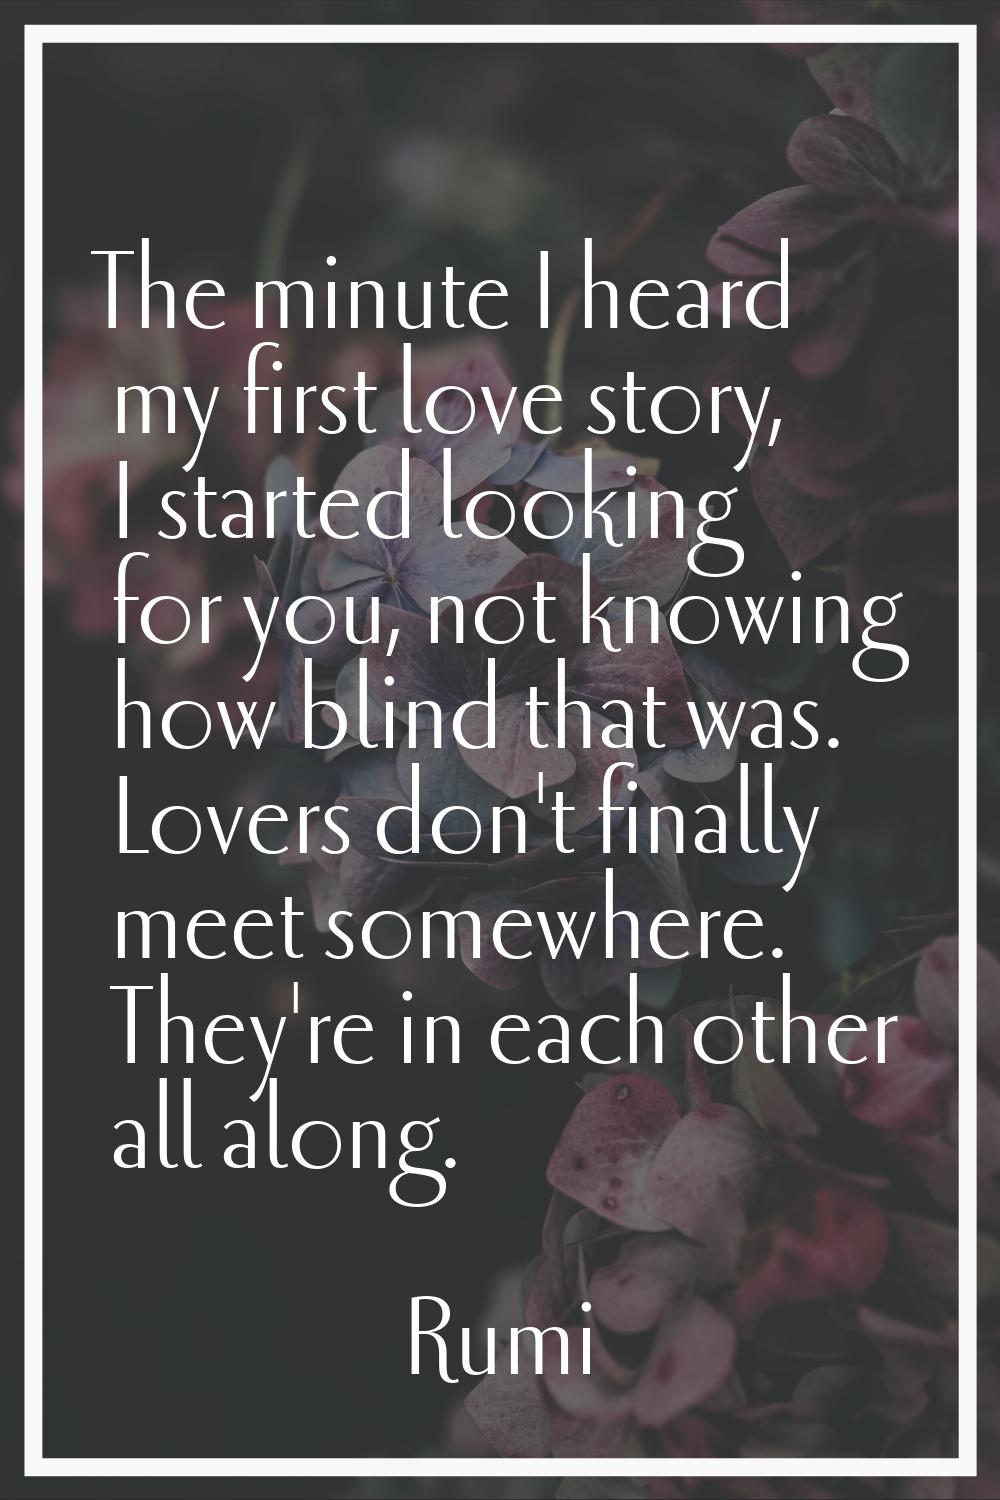 The minute I heard my first love story, I started looking for you, not knowing how blind that was. 